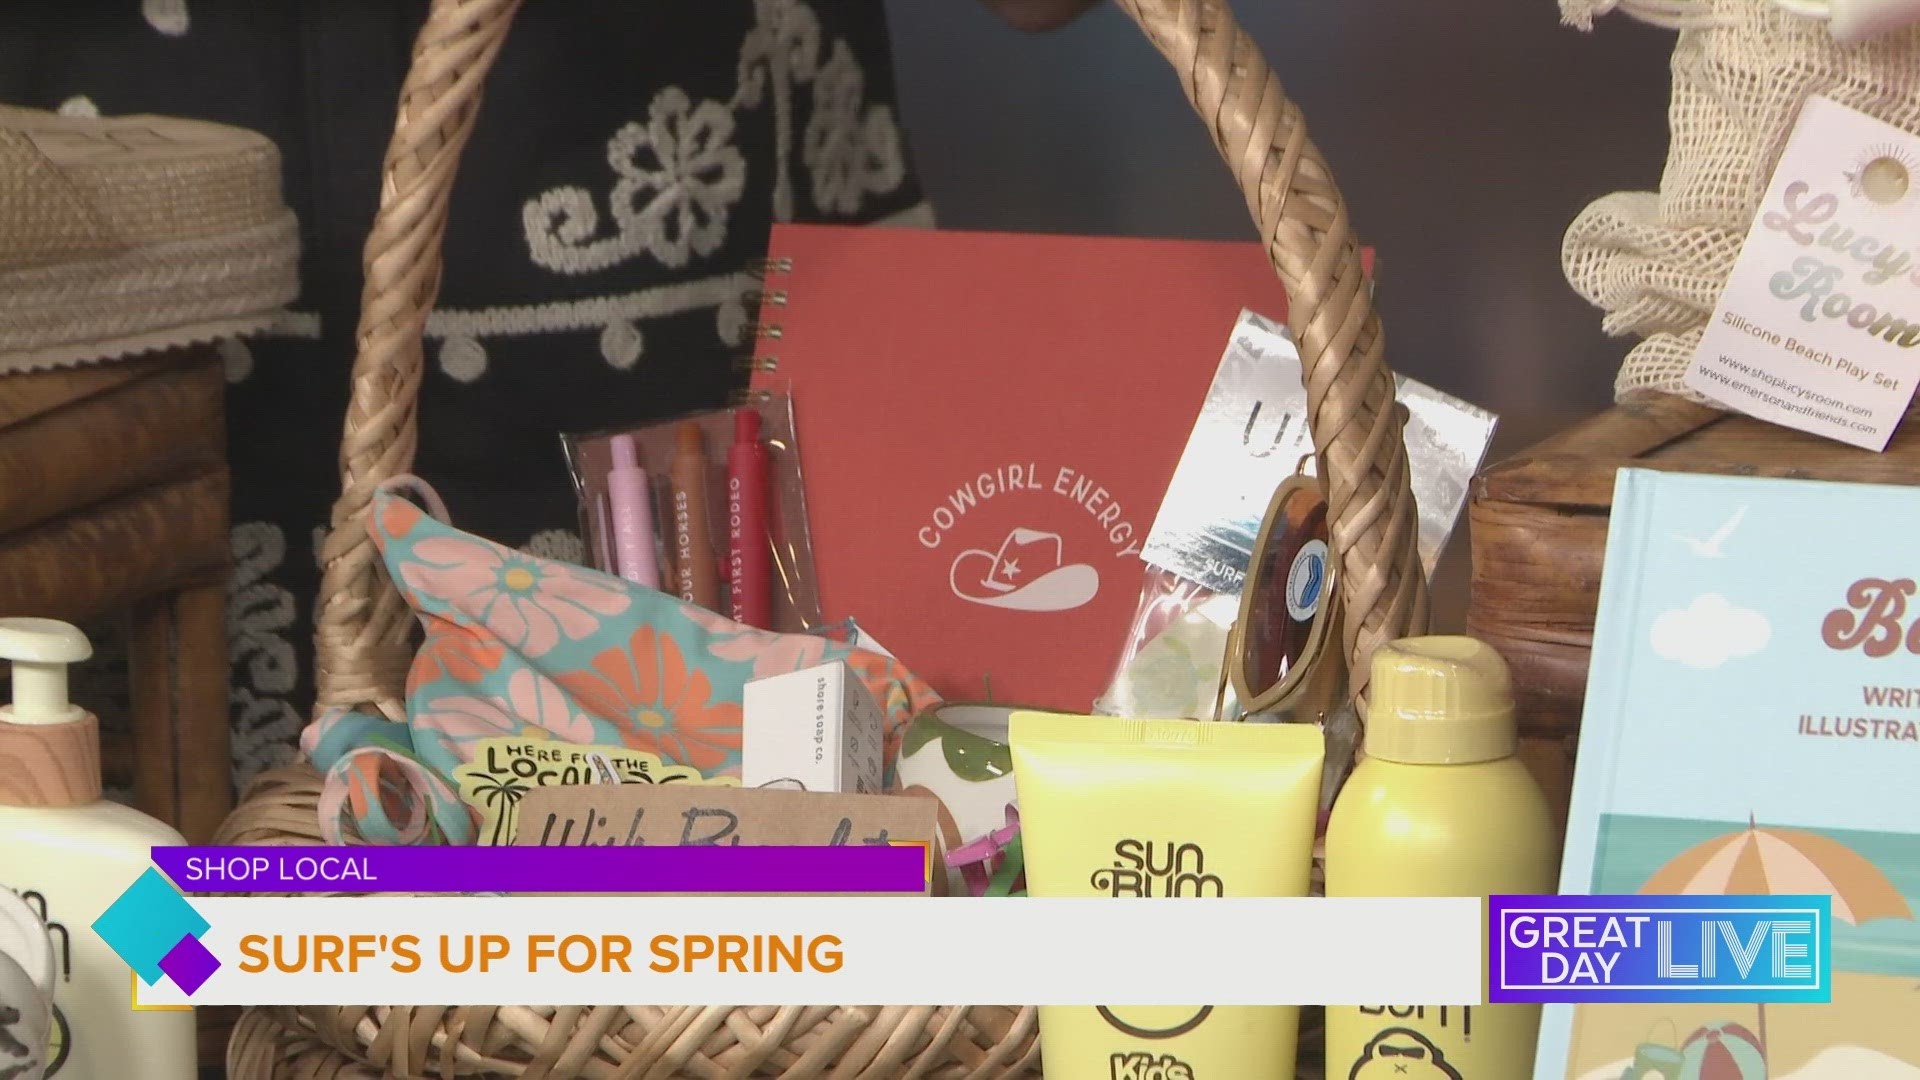 Blacktop Surf Shop shares what’s blooming this spring in beach fashion and Easter gifts.